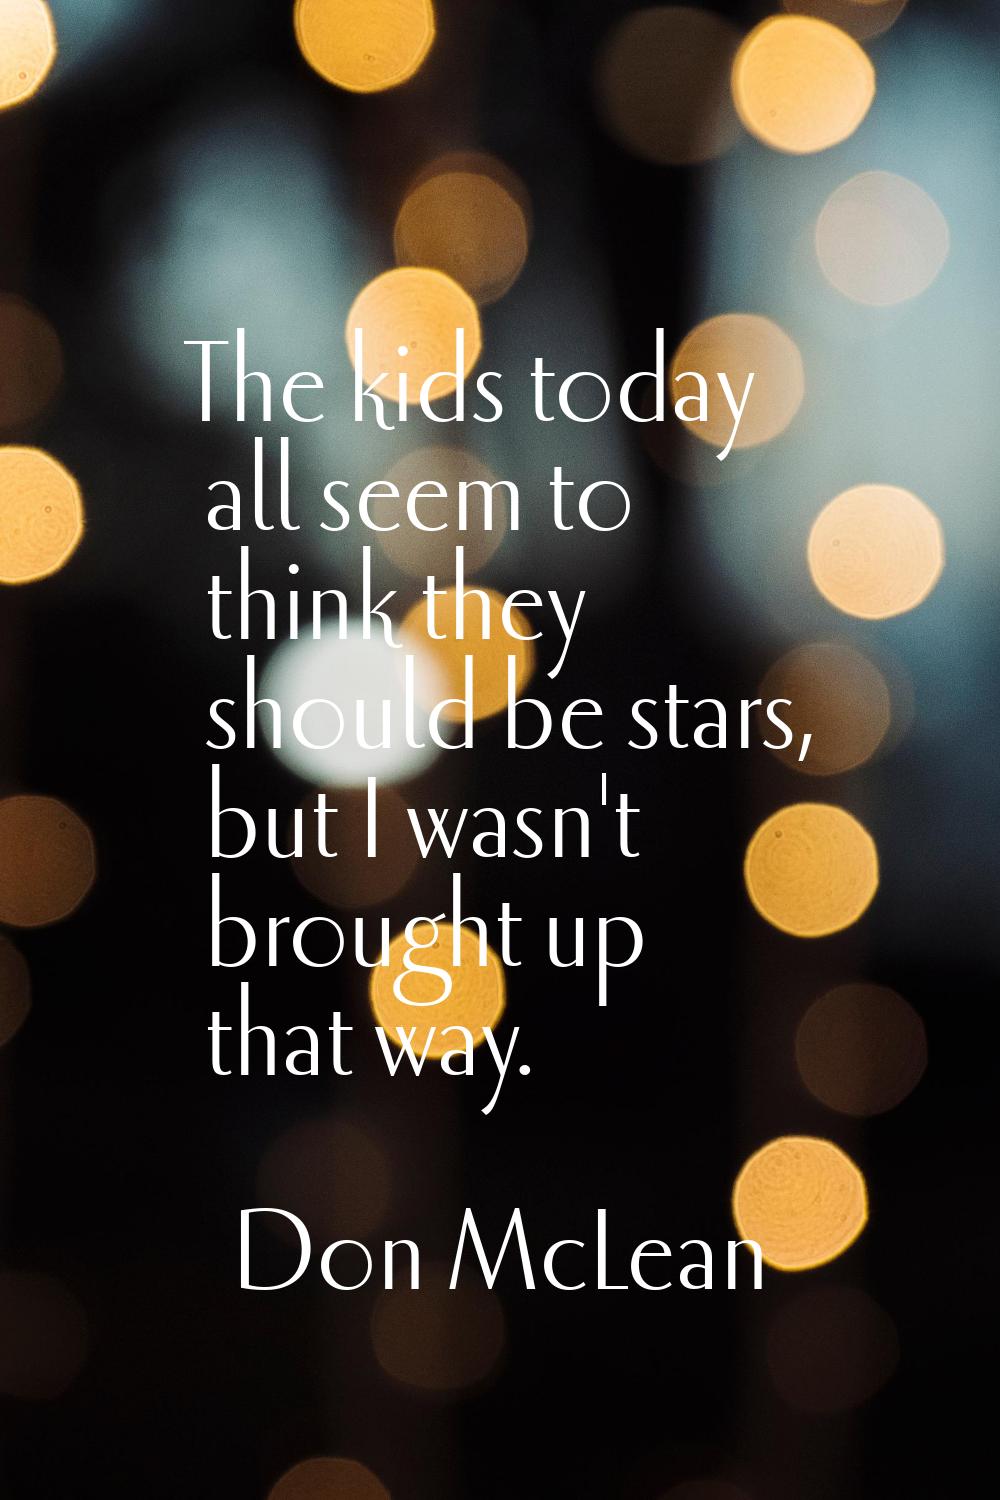 The kids today all seem to think they should be stars, but I wasn't brought up that way.